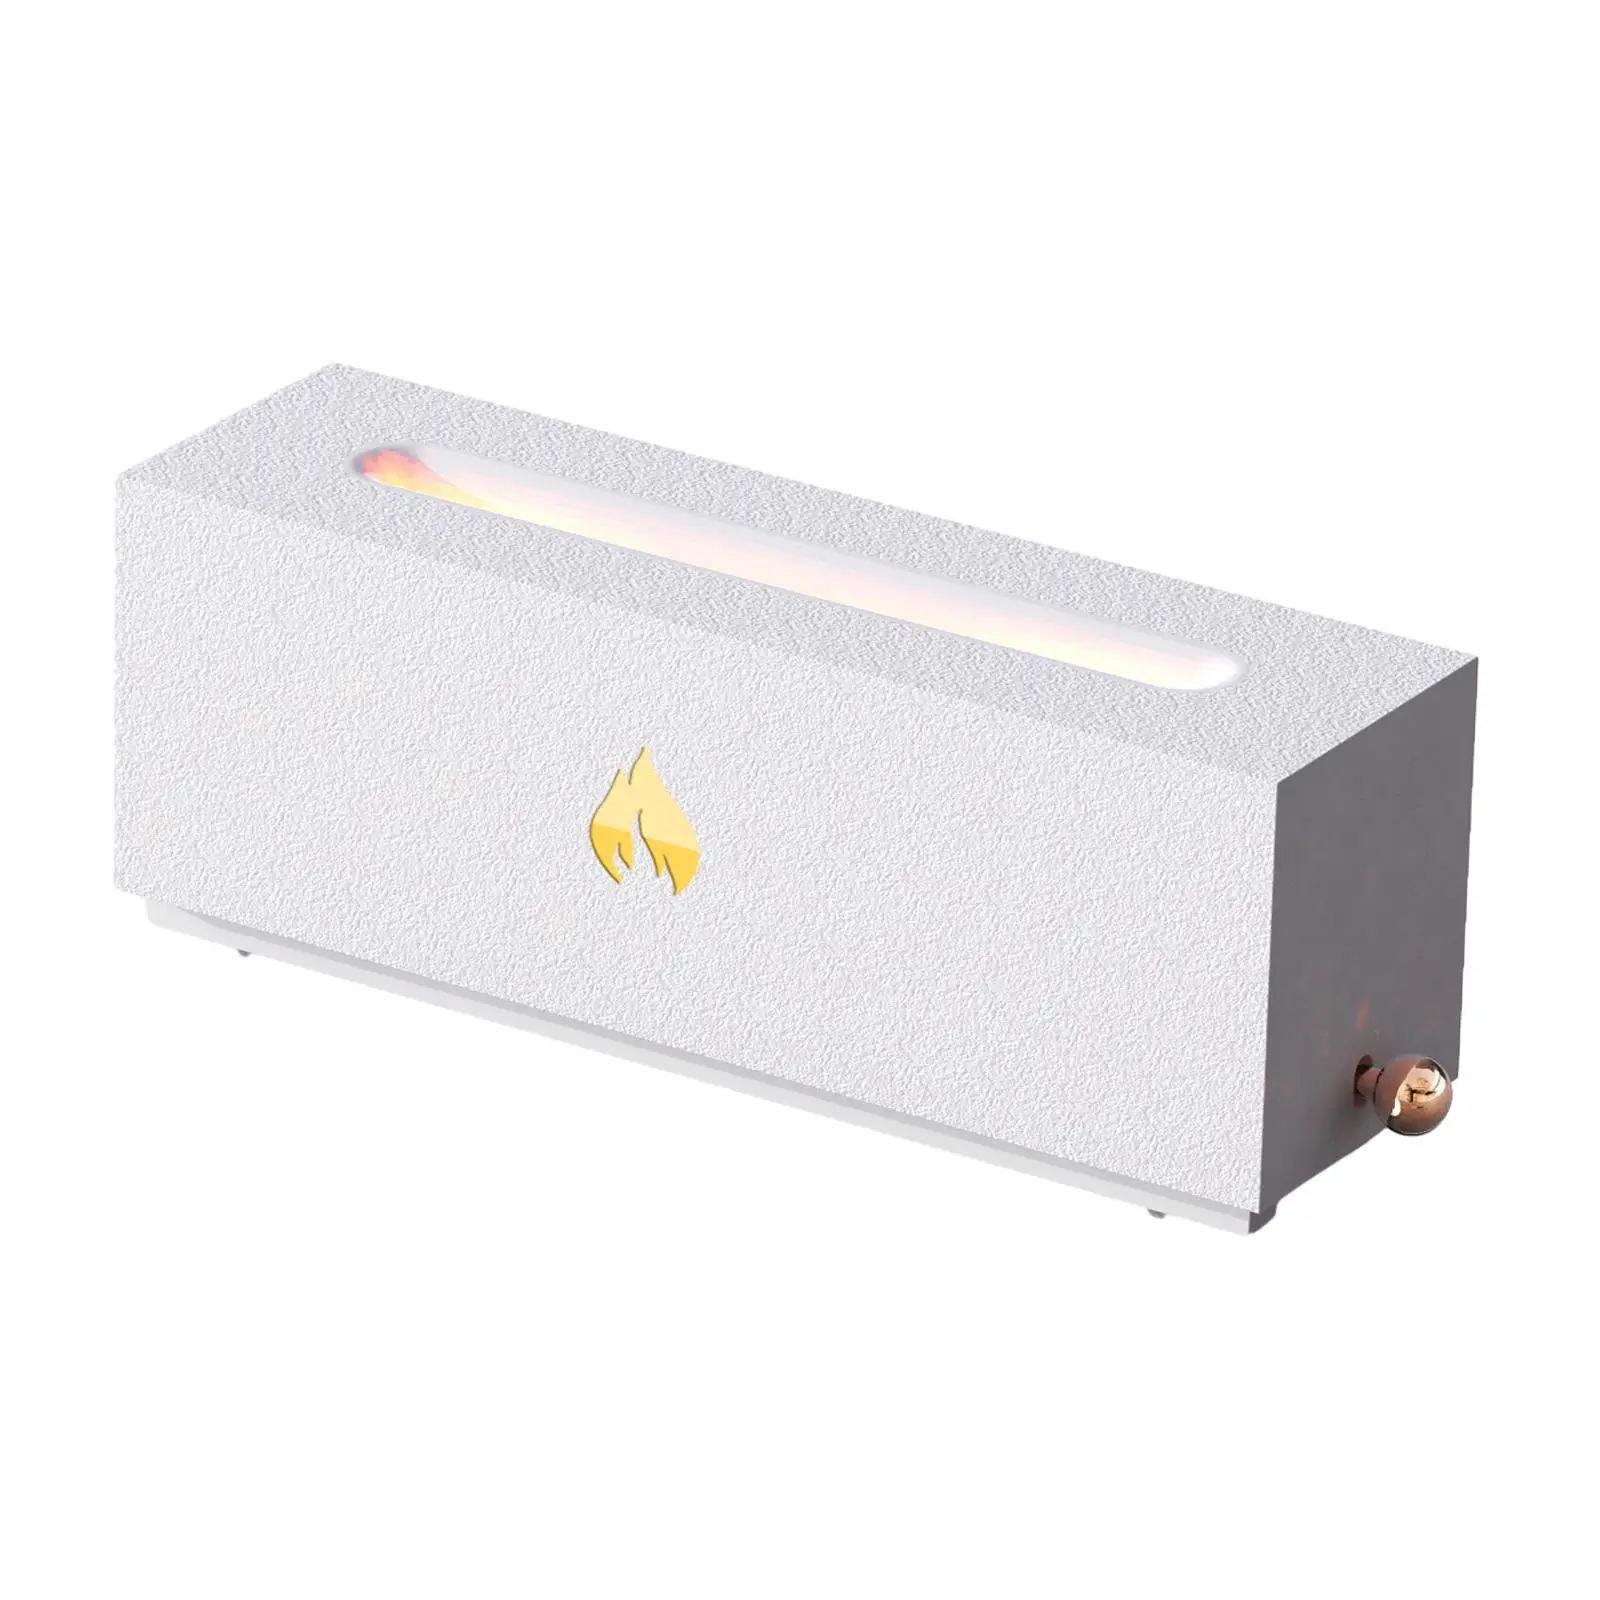 Home Fragrance Diffuser 3 Light Modes Atmosphere Light 320ml Portable Flame Diffuser for Large Room Gym Yoga Bedroom Decoration